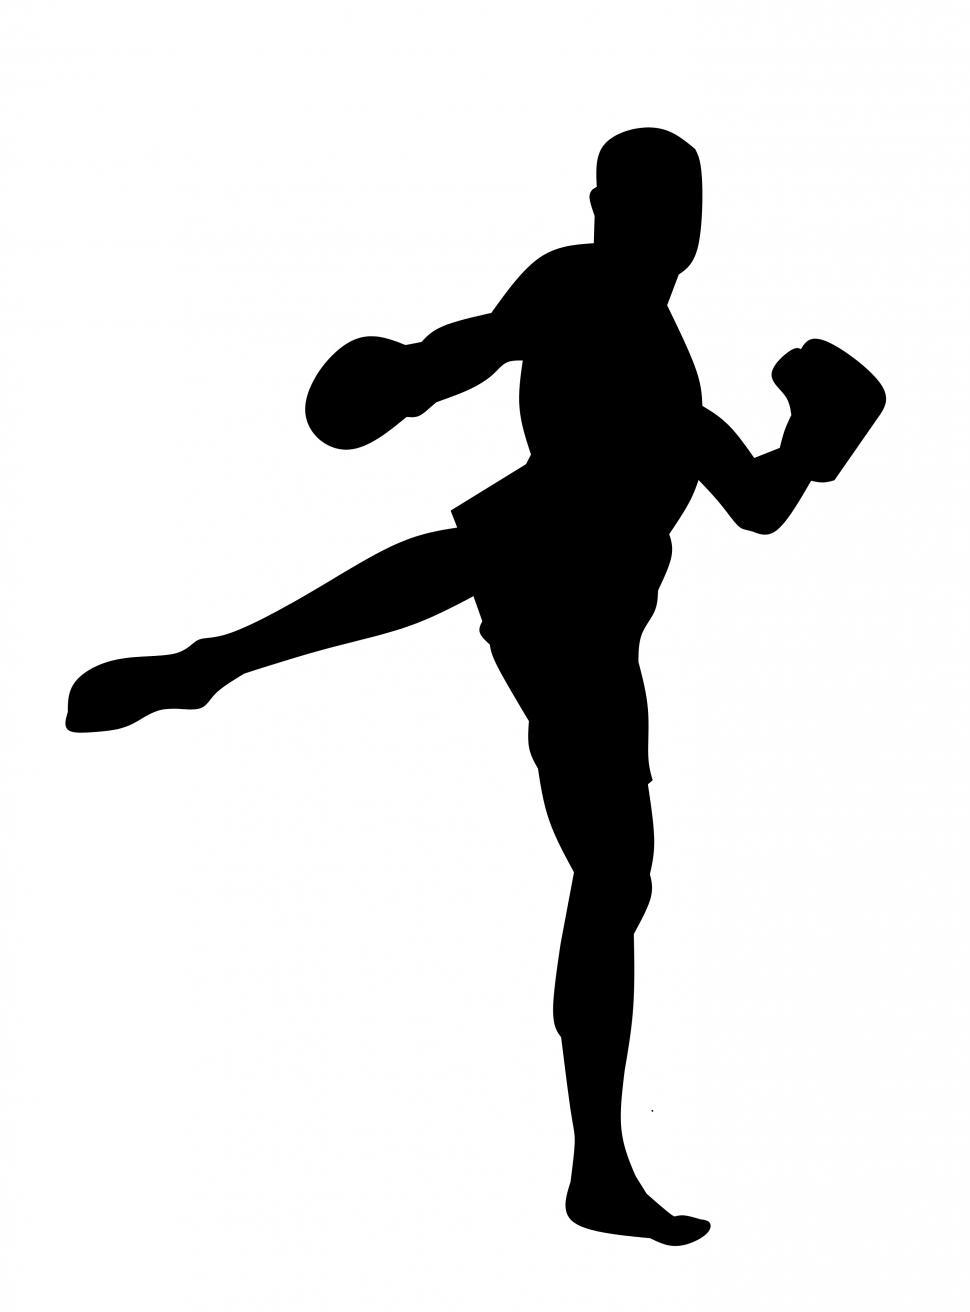 Download Free Stock Photo of Kickboxing silhouette   